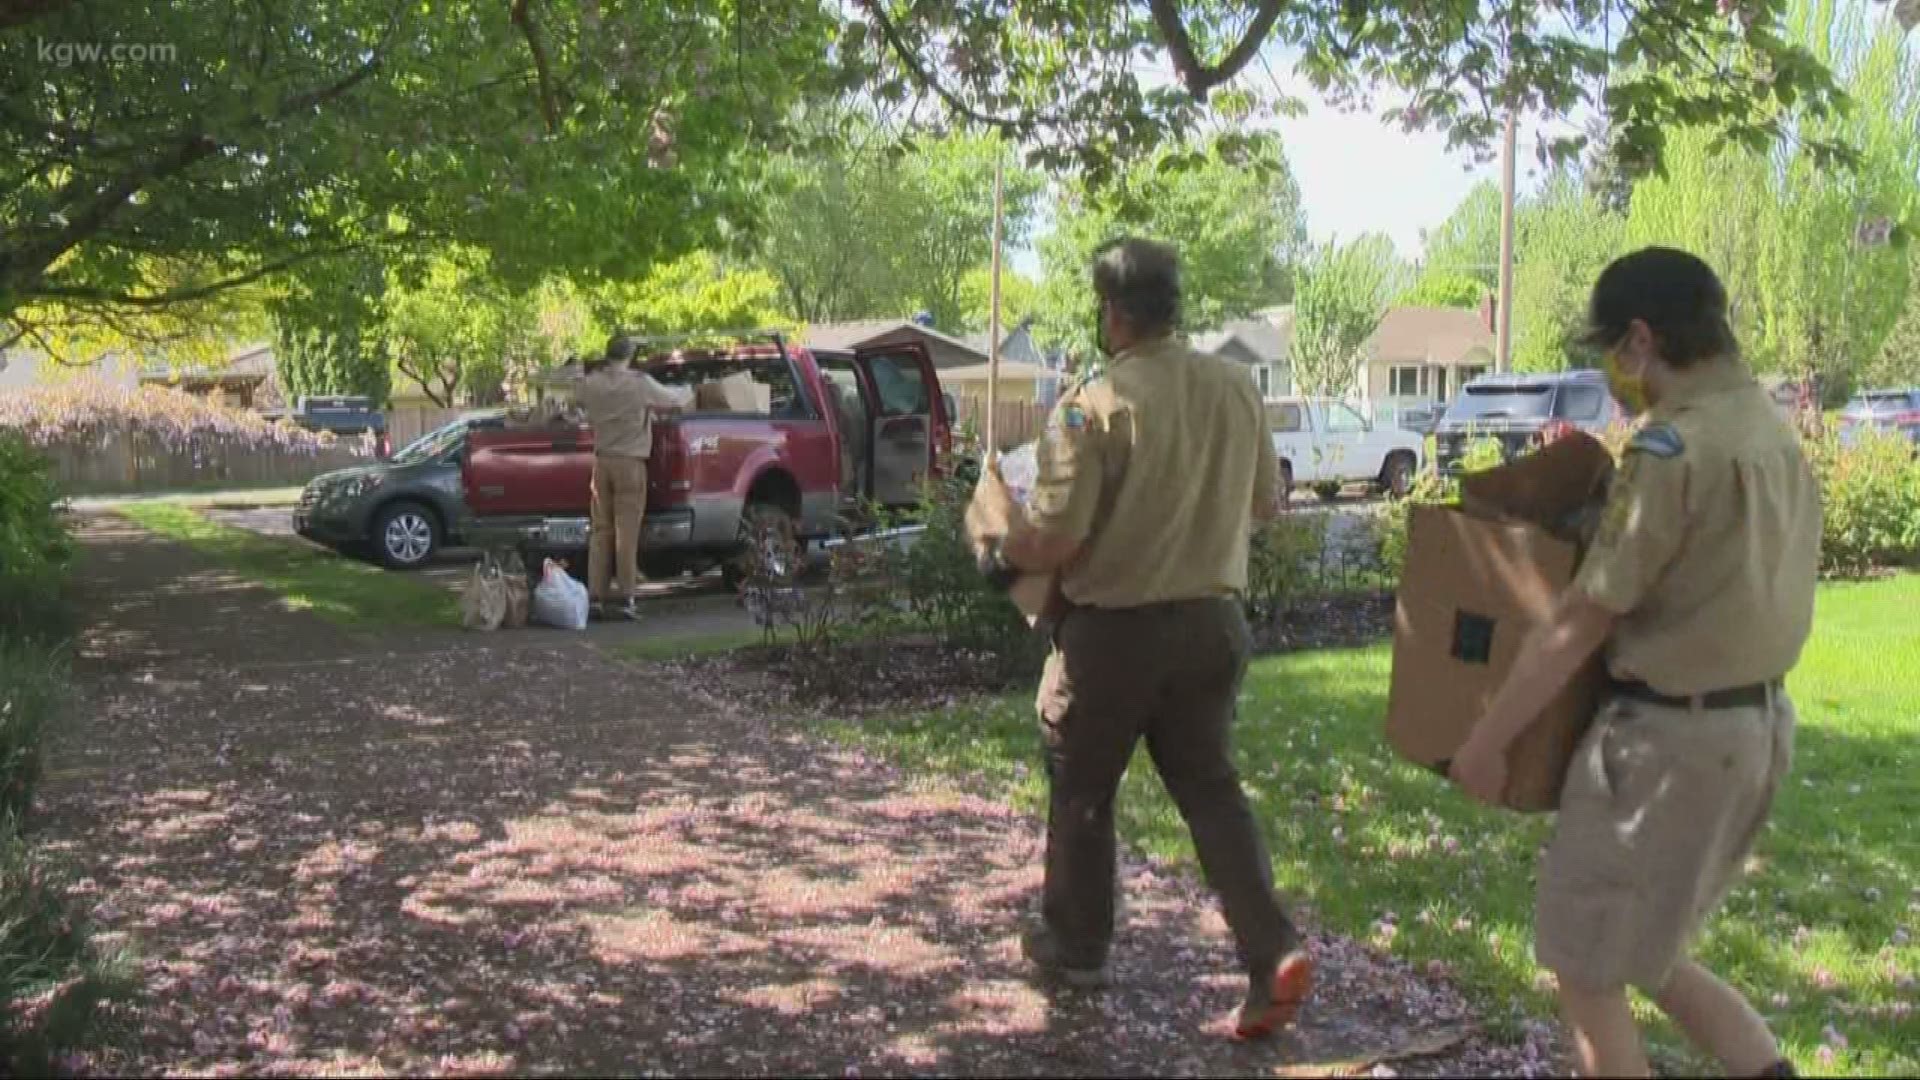 Meet a Boy Scout who made a donation to a local nonprofit.